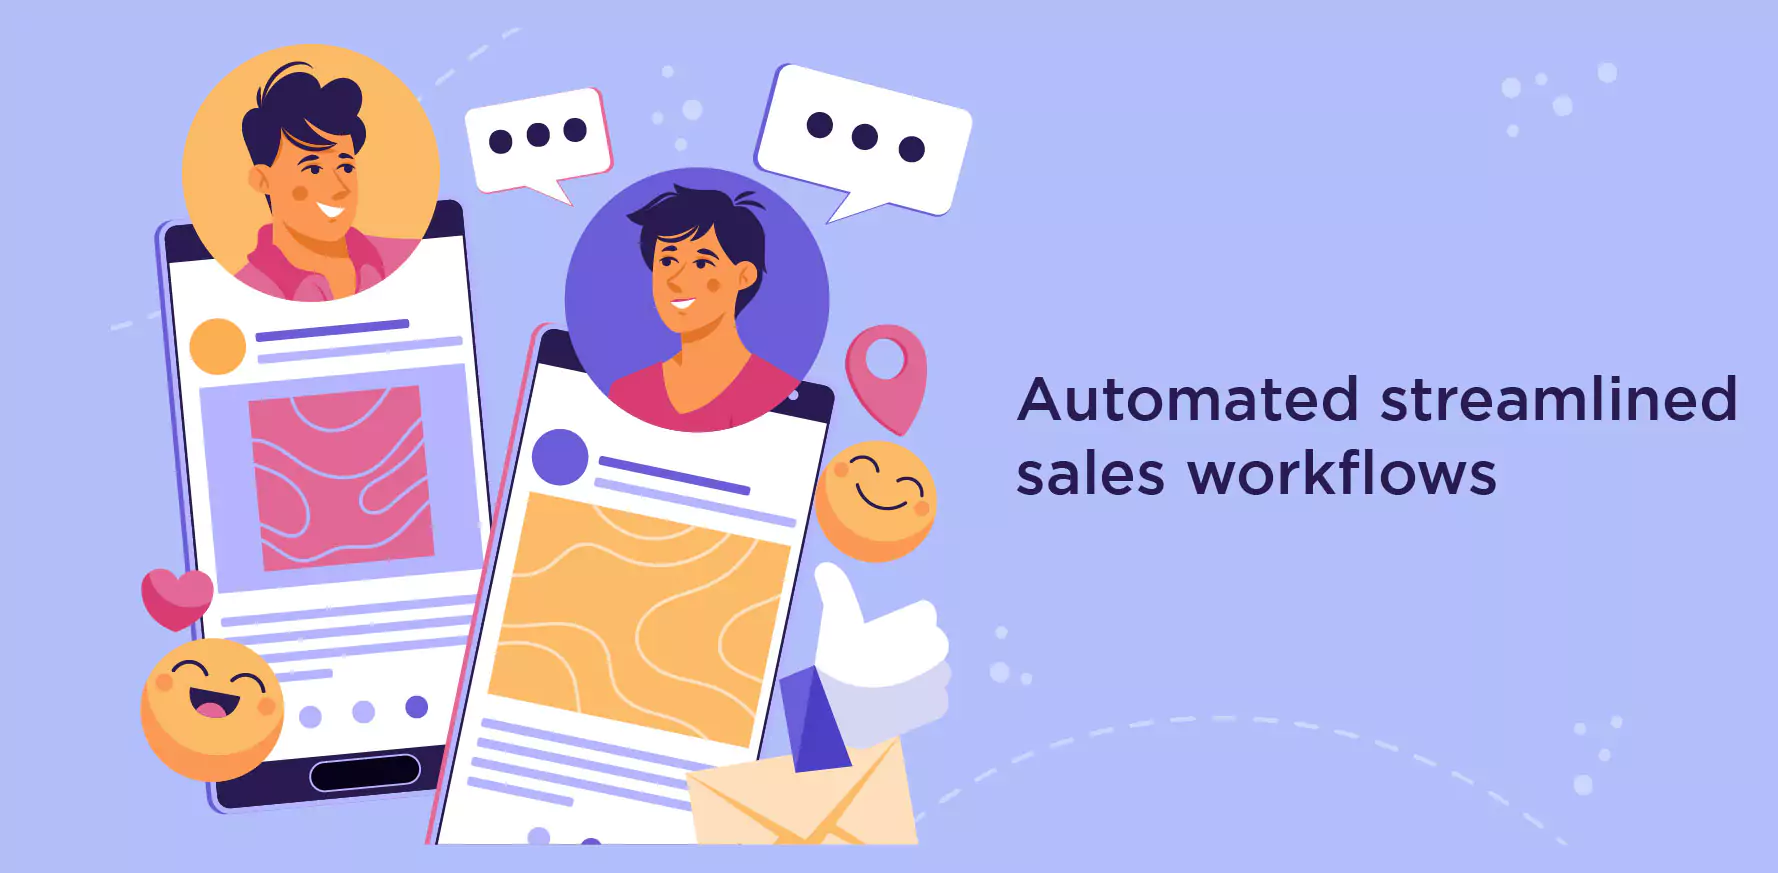 Automated streamlined sales workflows